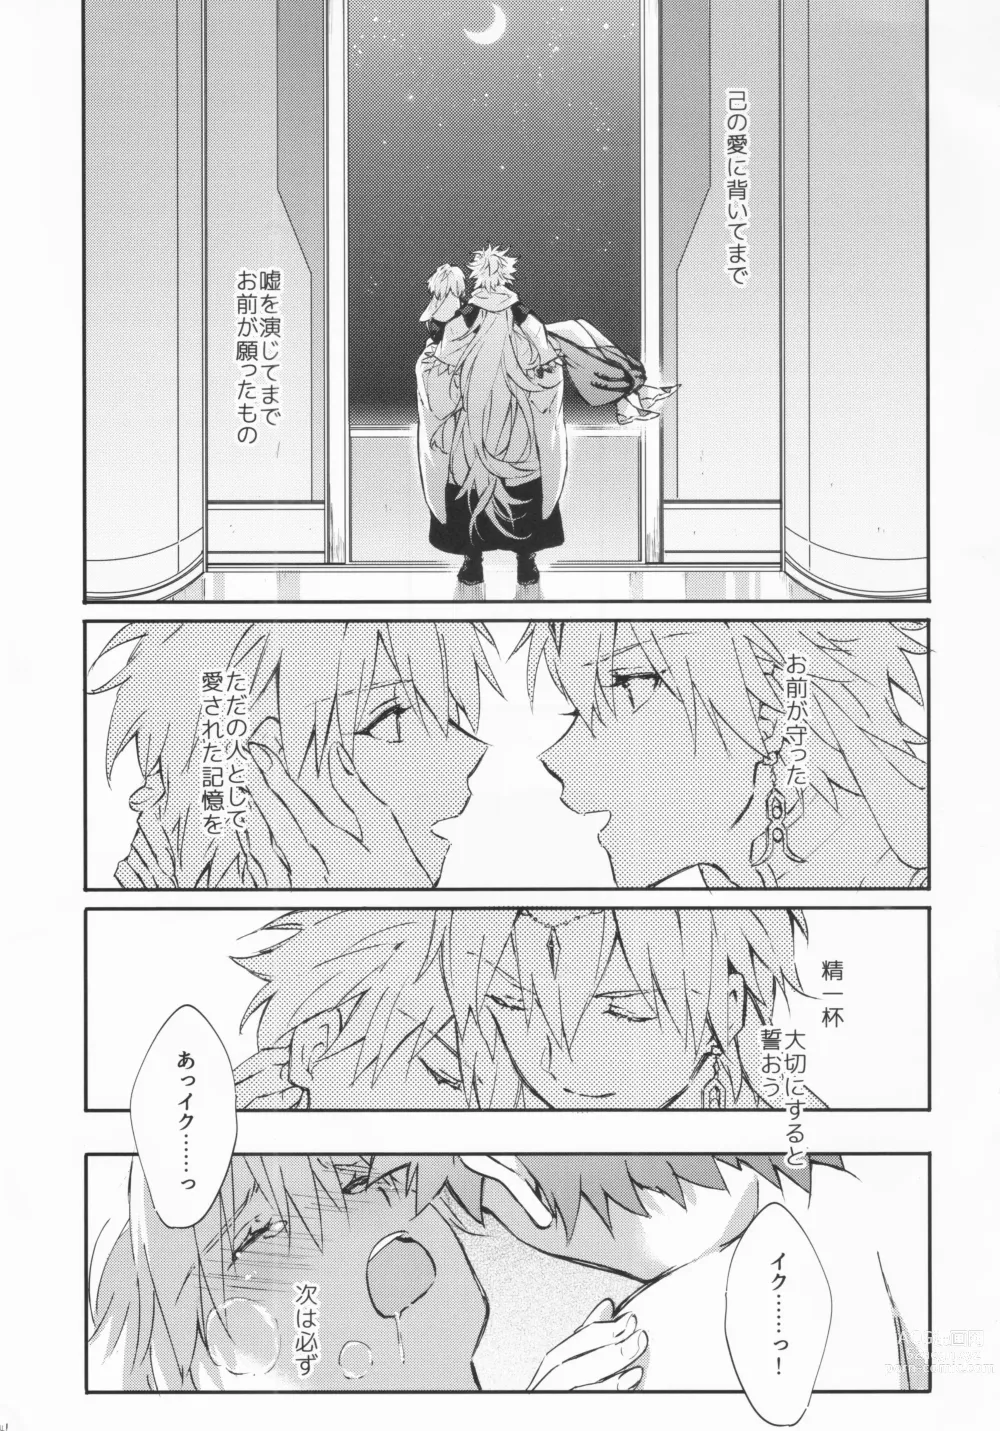 Page 42 of doujinshi STARDUST LOVESONG encore special story 2nd After 7 Days